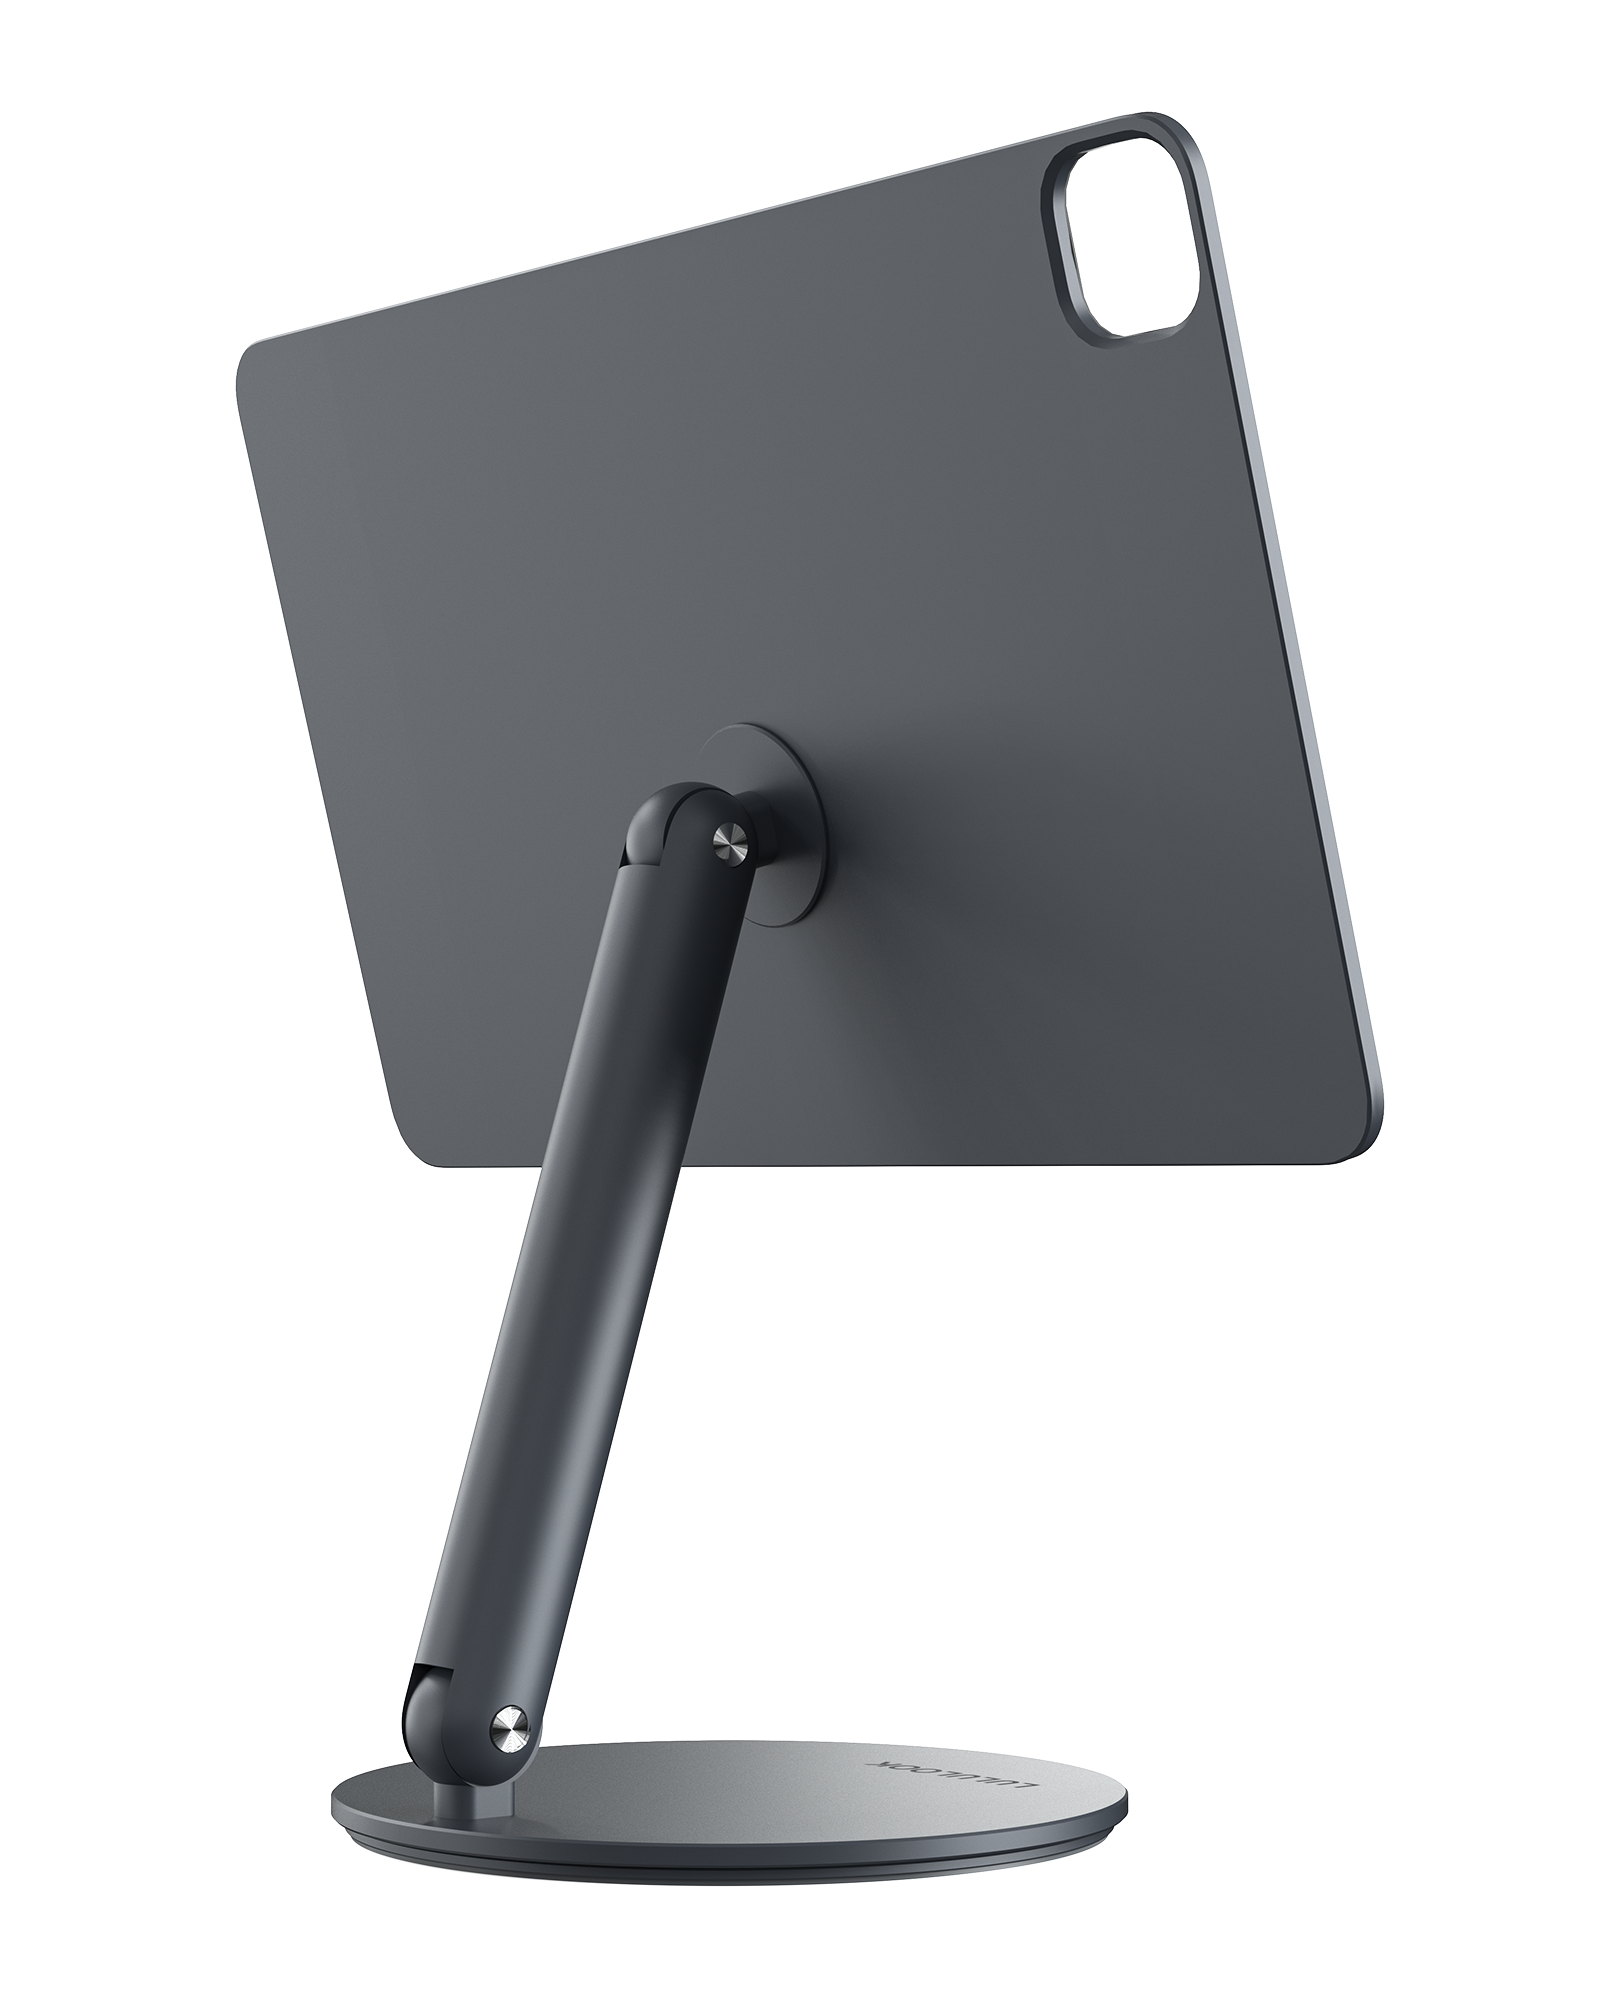 Buy LULULOOK 360 Rotating Foldable Magnetic iPad Stand - Lululook Official